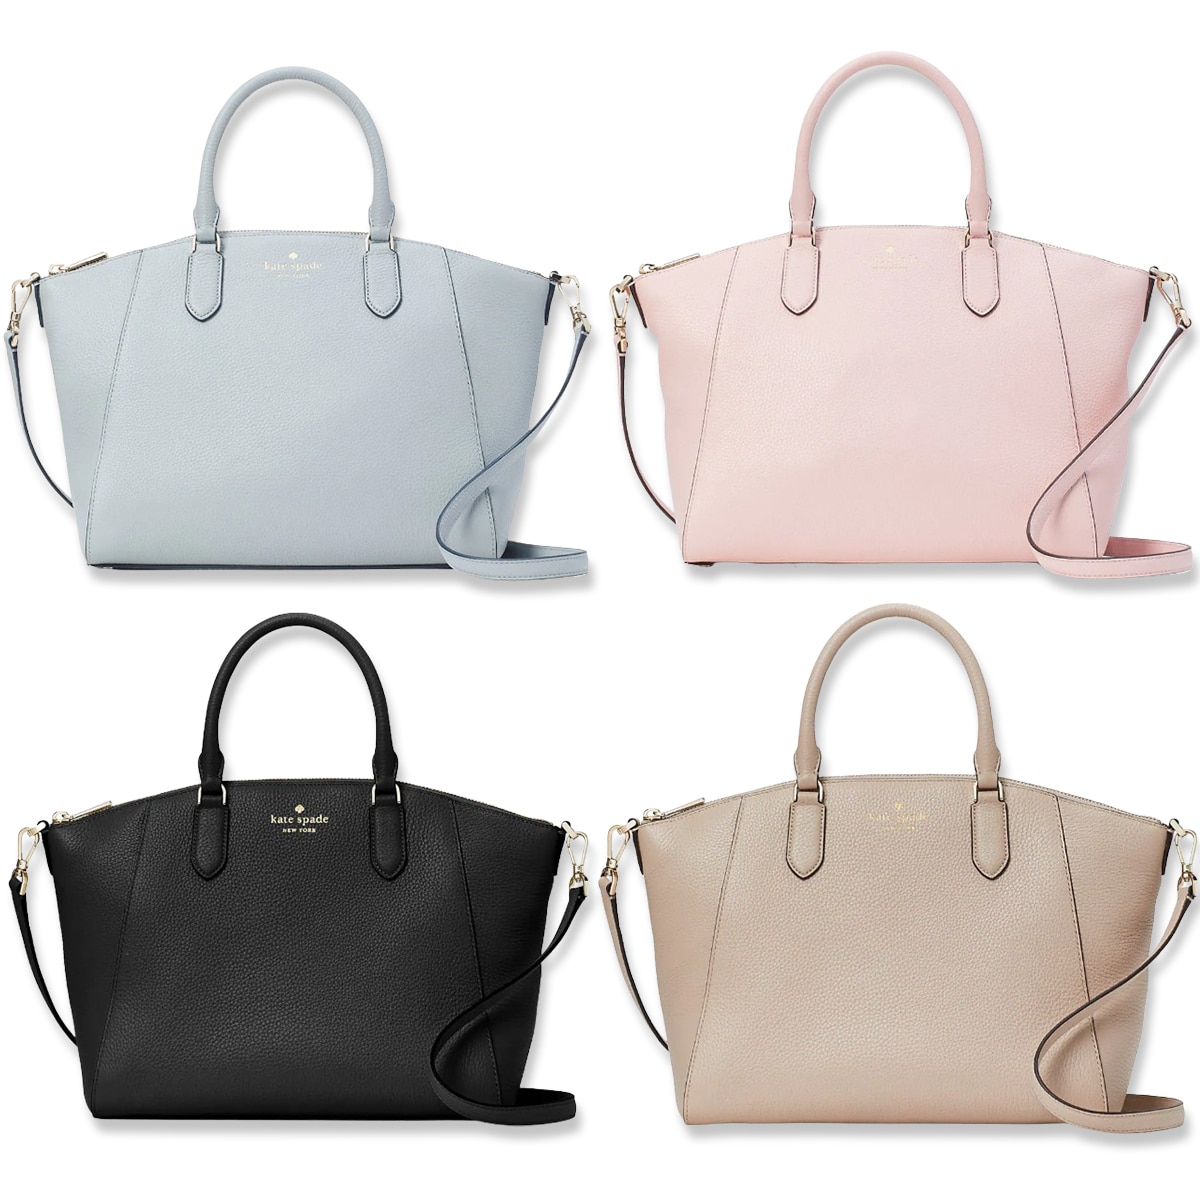 Kate Spade 24-Hour Flash Deal: Get This $400 Bag for Just $89 - E! Online